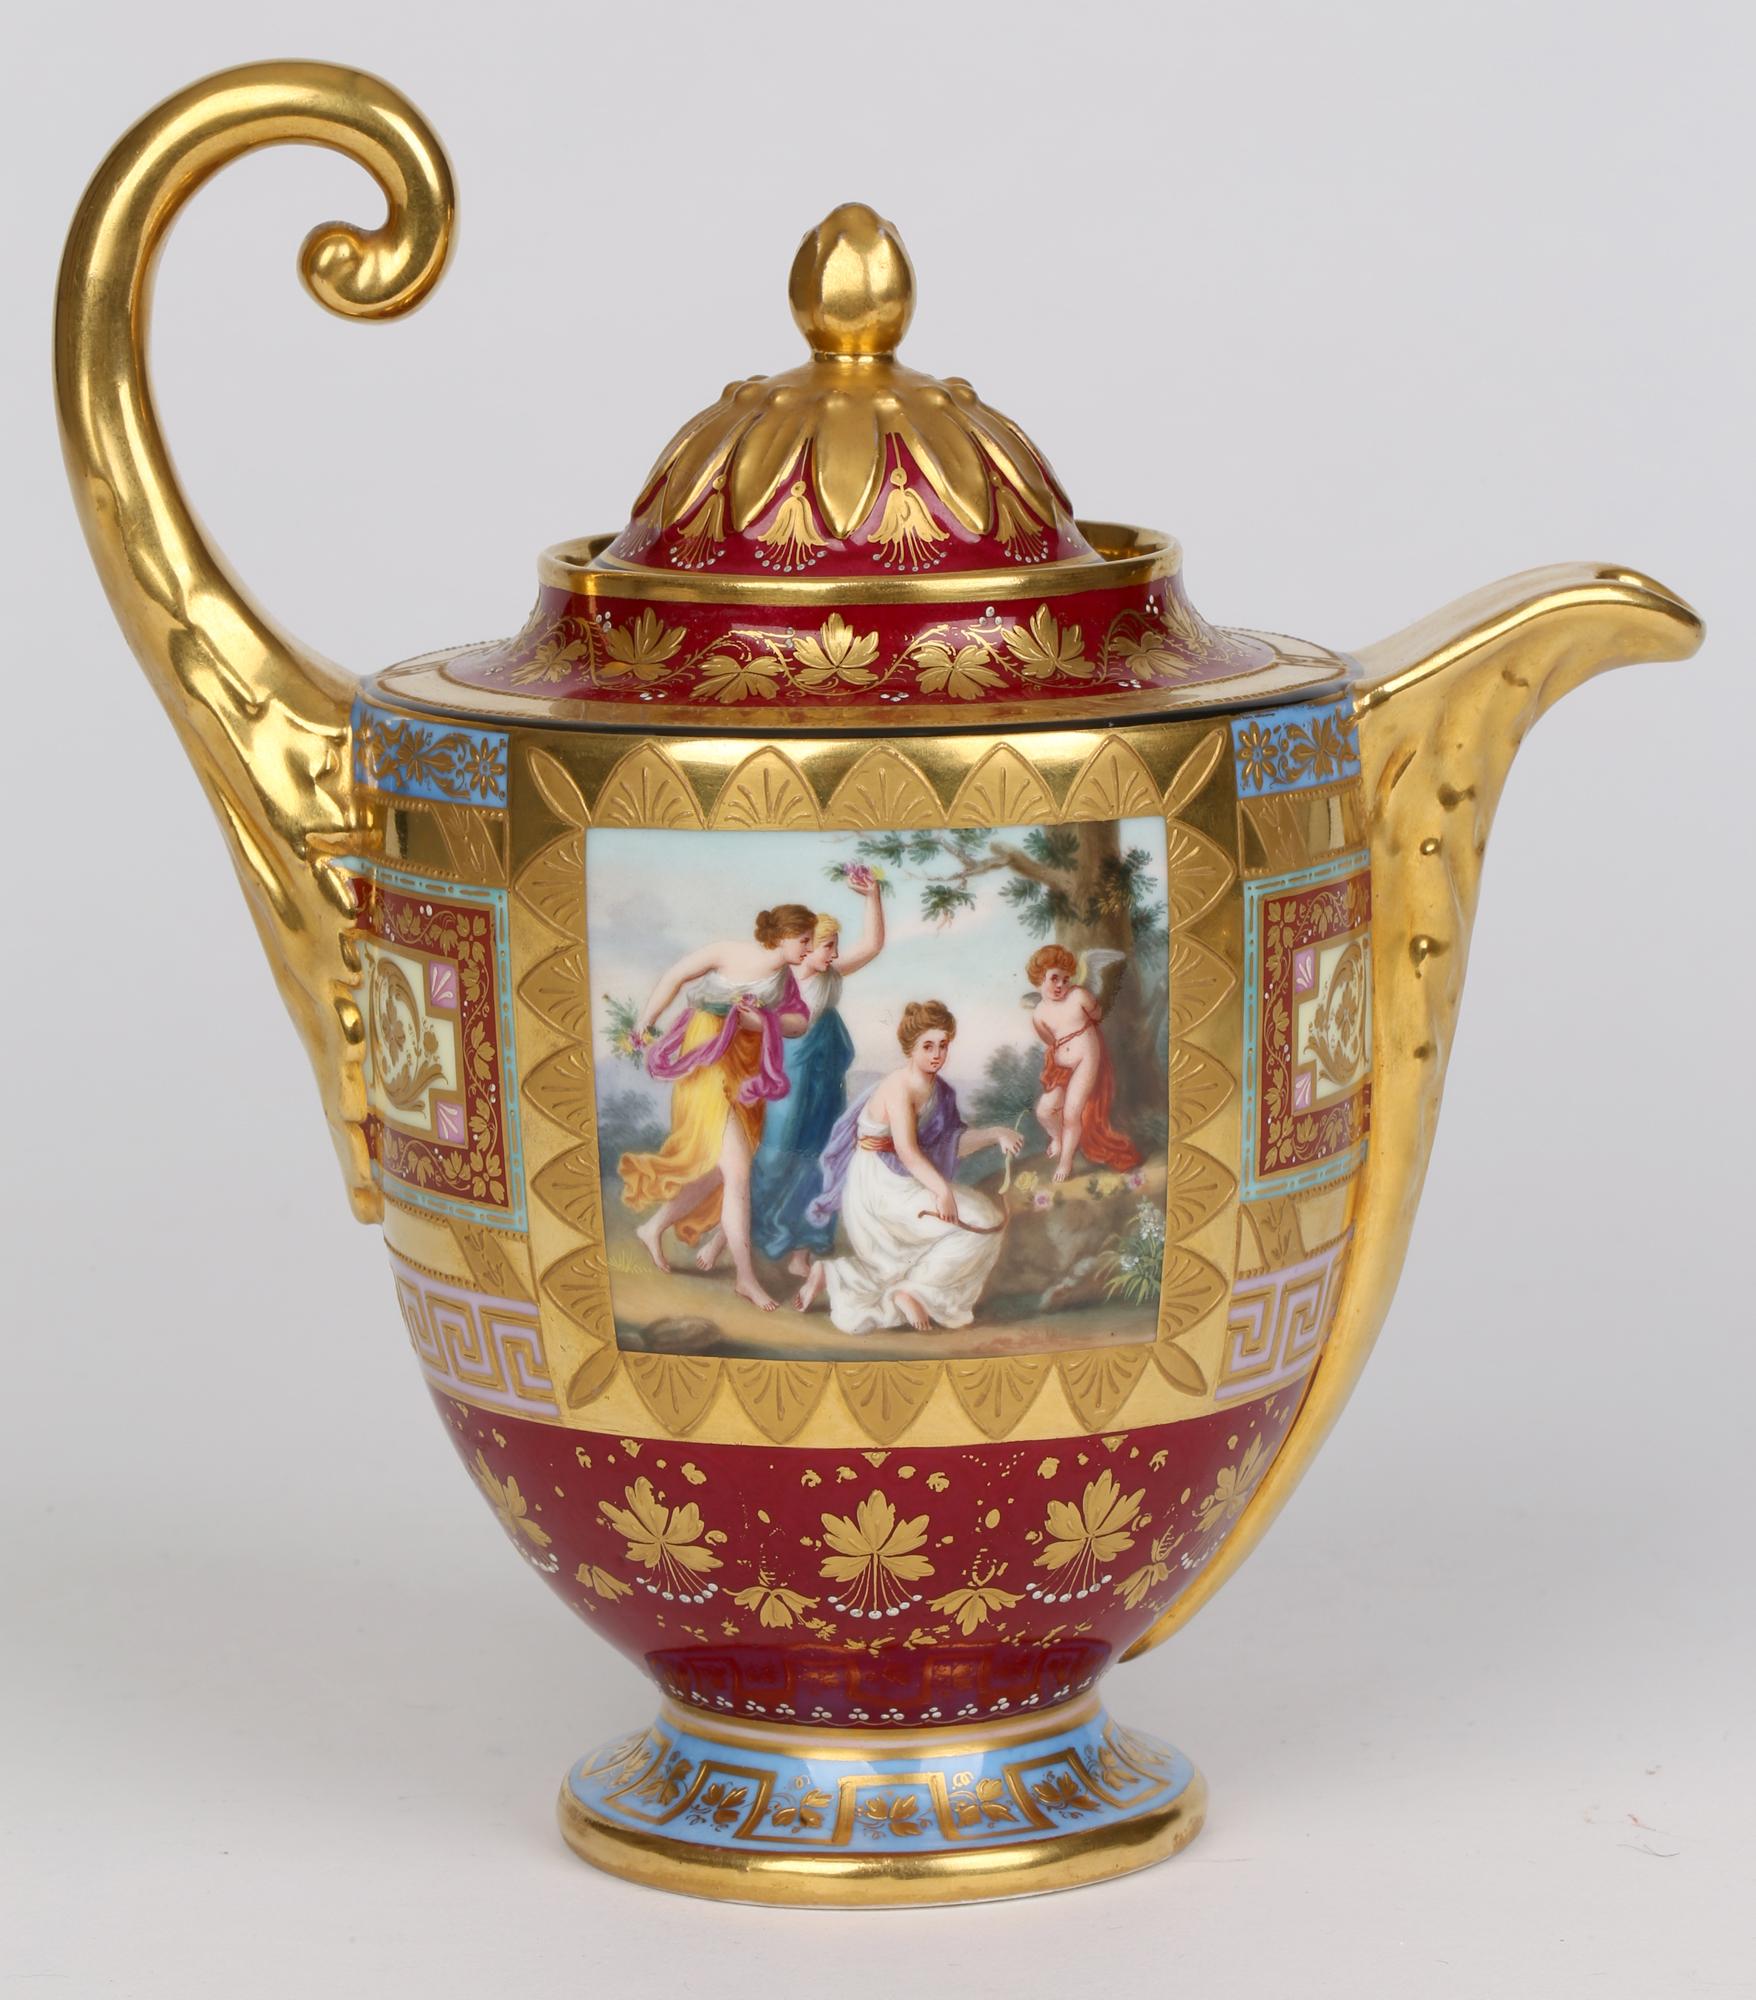 An exceptional antique Austian hand-painted porcelain chocolate pot and stand by the renowned Vienna factory and dating from the 19th century. This exquisite set combines a rounded purpose made stand with a central raised support for the chocolate